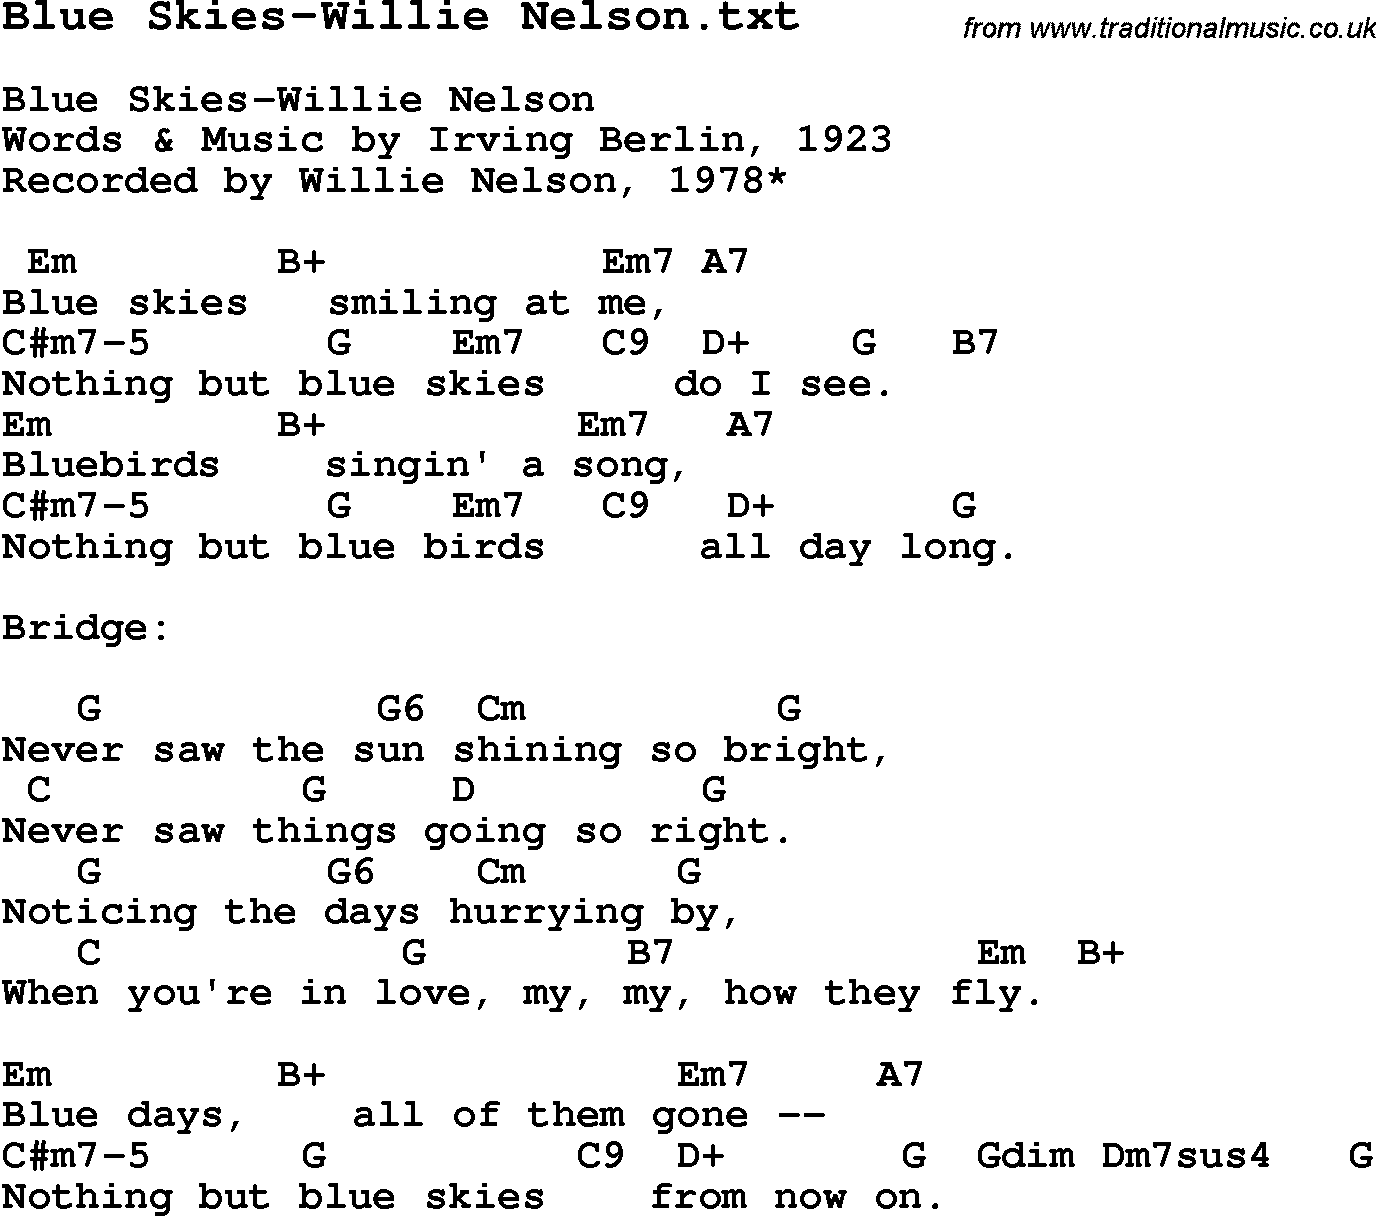 Jazz Song from top bands and vocal artists with chords, tabs and lyrics - Blue Skies-Willie Nelson